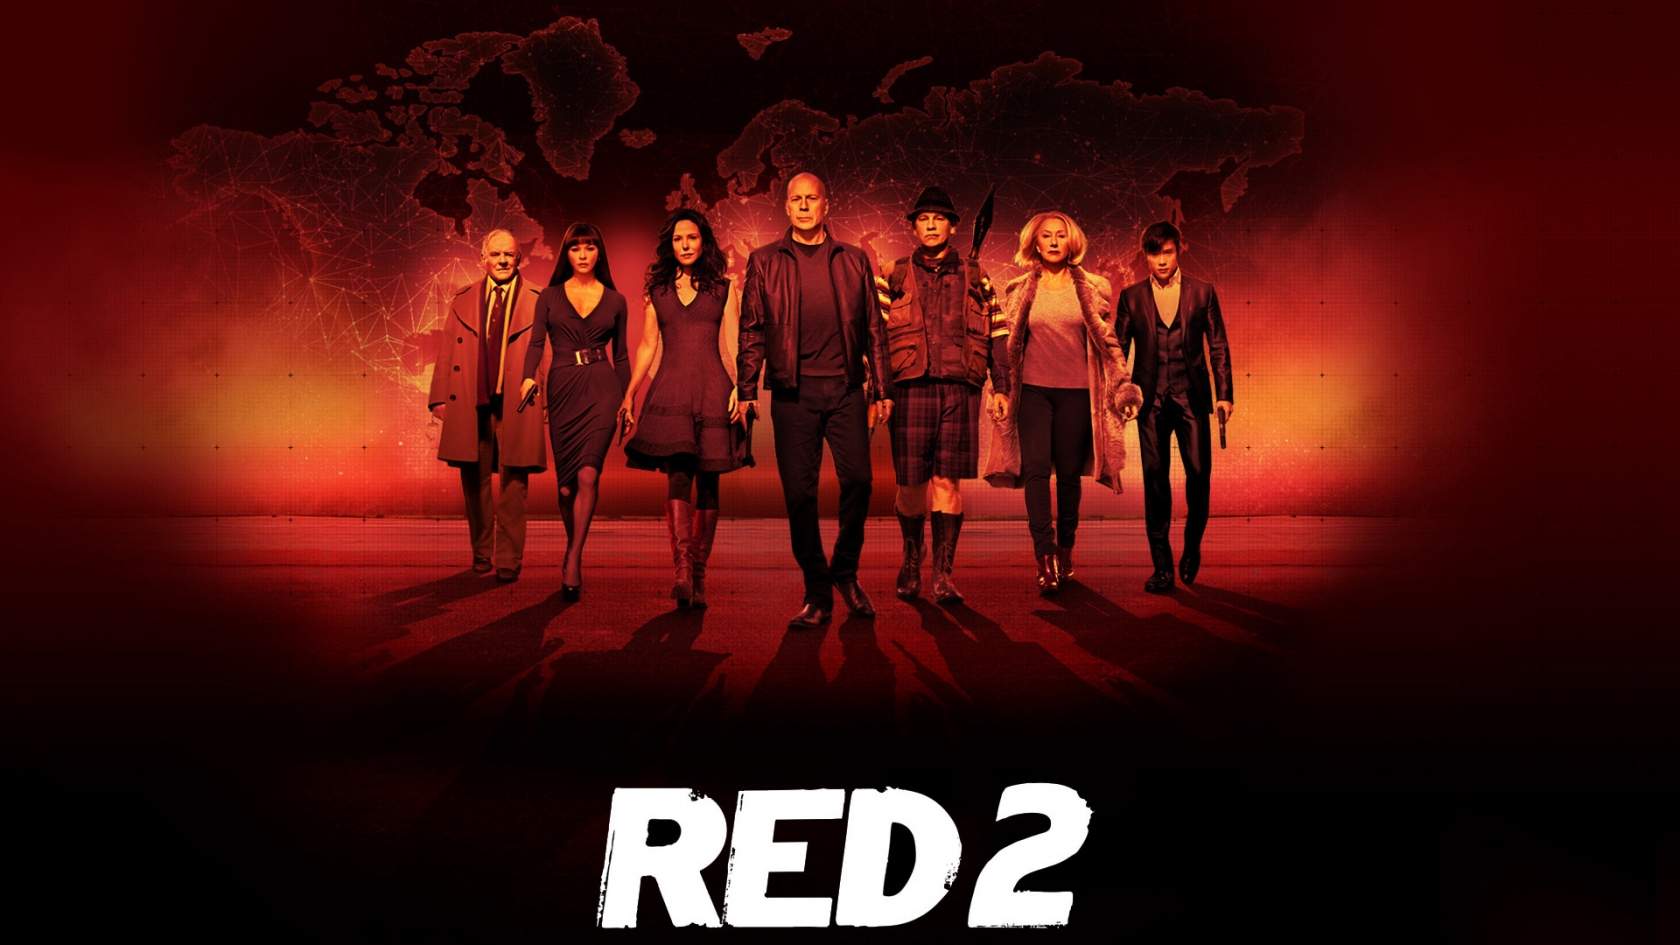 Red 2 Movie for 1680 x 945 HDTV resolution